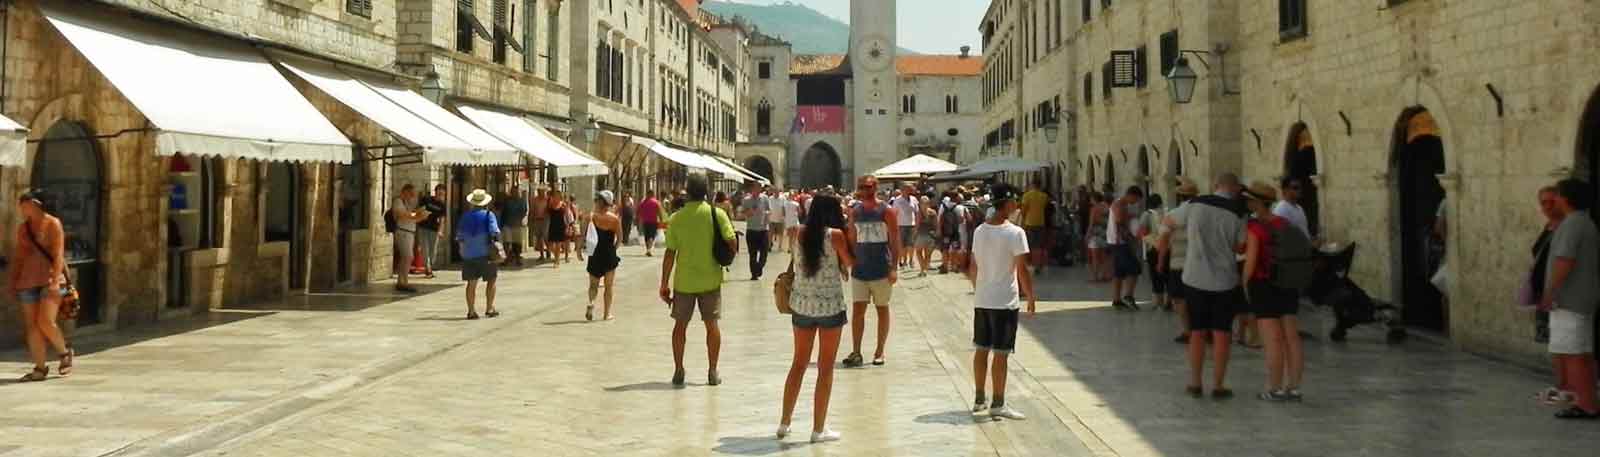 Photo by IQCruising of Placa or Stradum in Dubrovnik cruise port